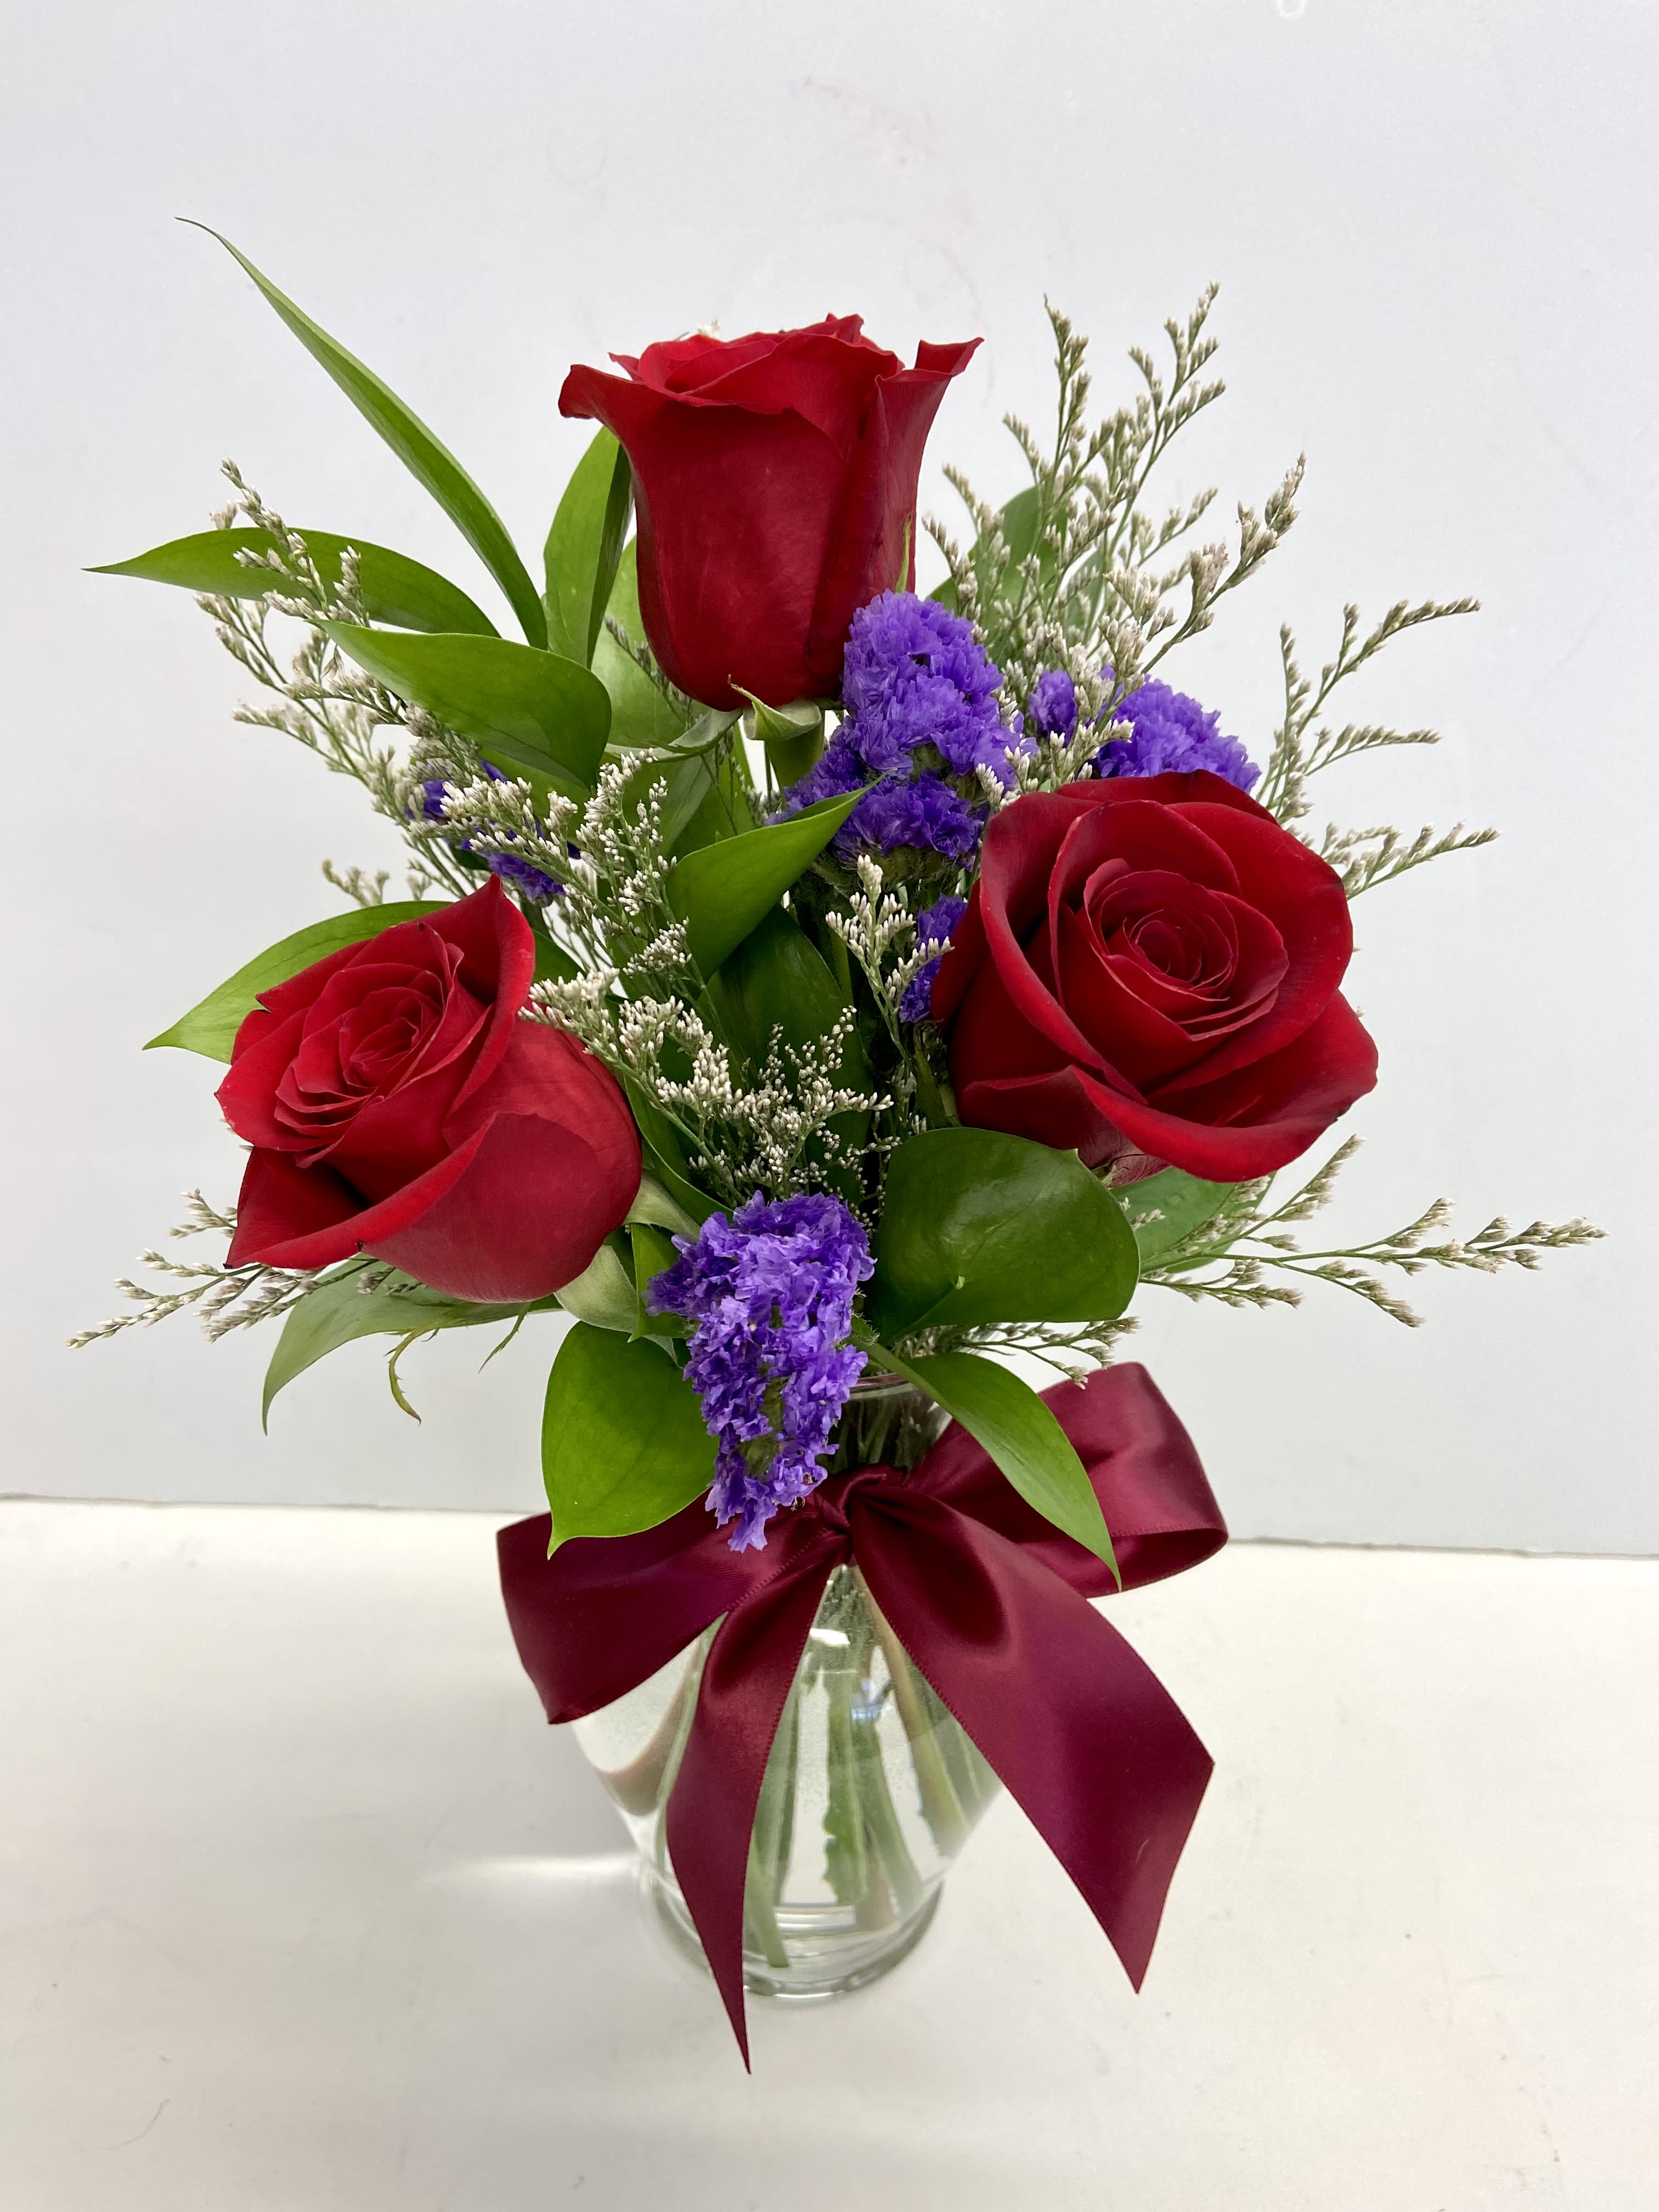  Love x 3 - 3 red roses with greens and purple statice just the simple message that I Love You!